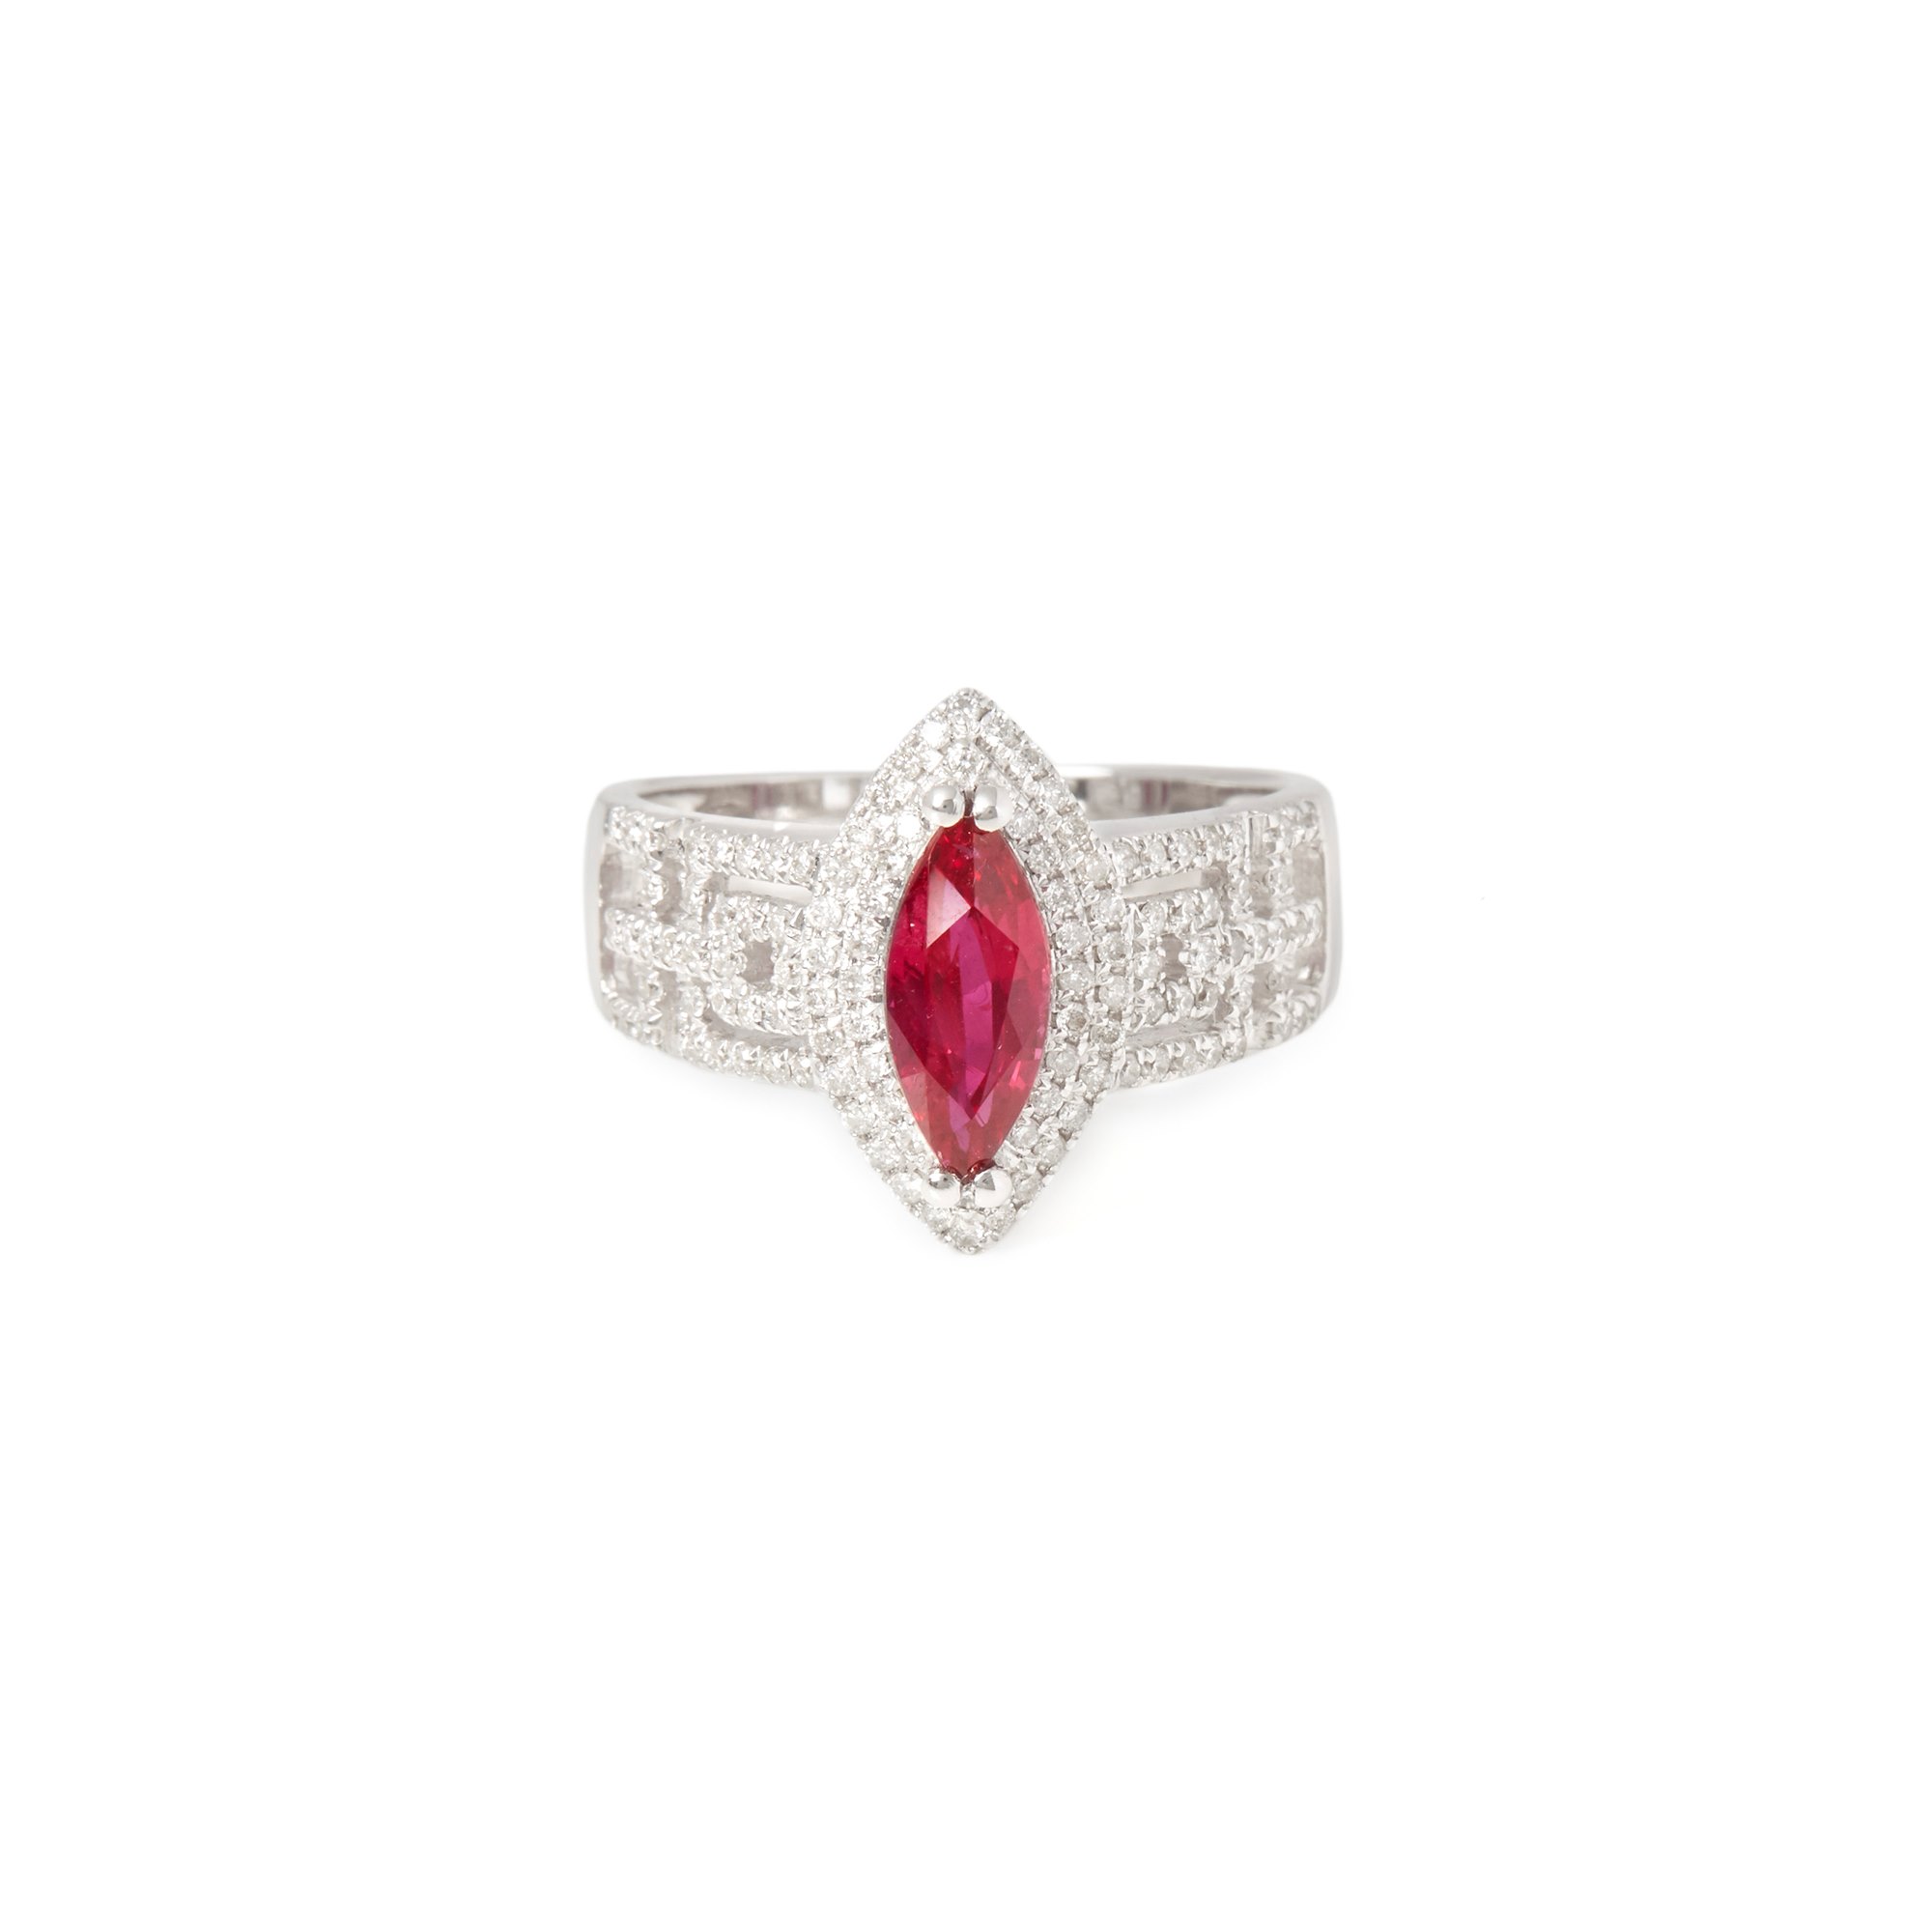 David Jerome Certified 1.13ct Untreated Burmese Marquise Cut Ruby and Diamond 18ct Gold Ring